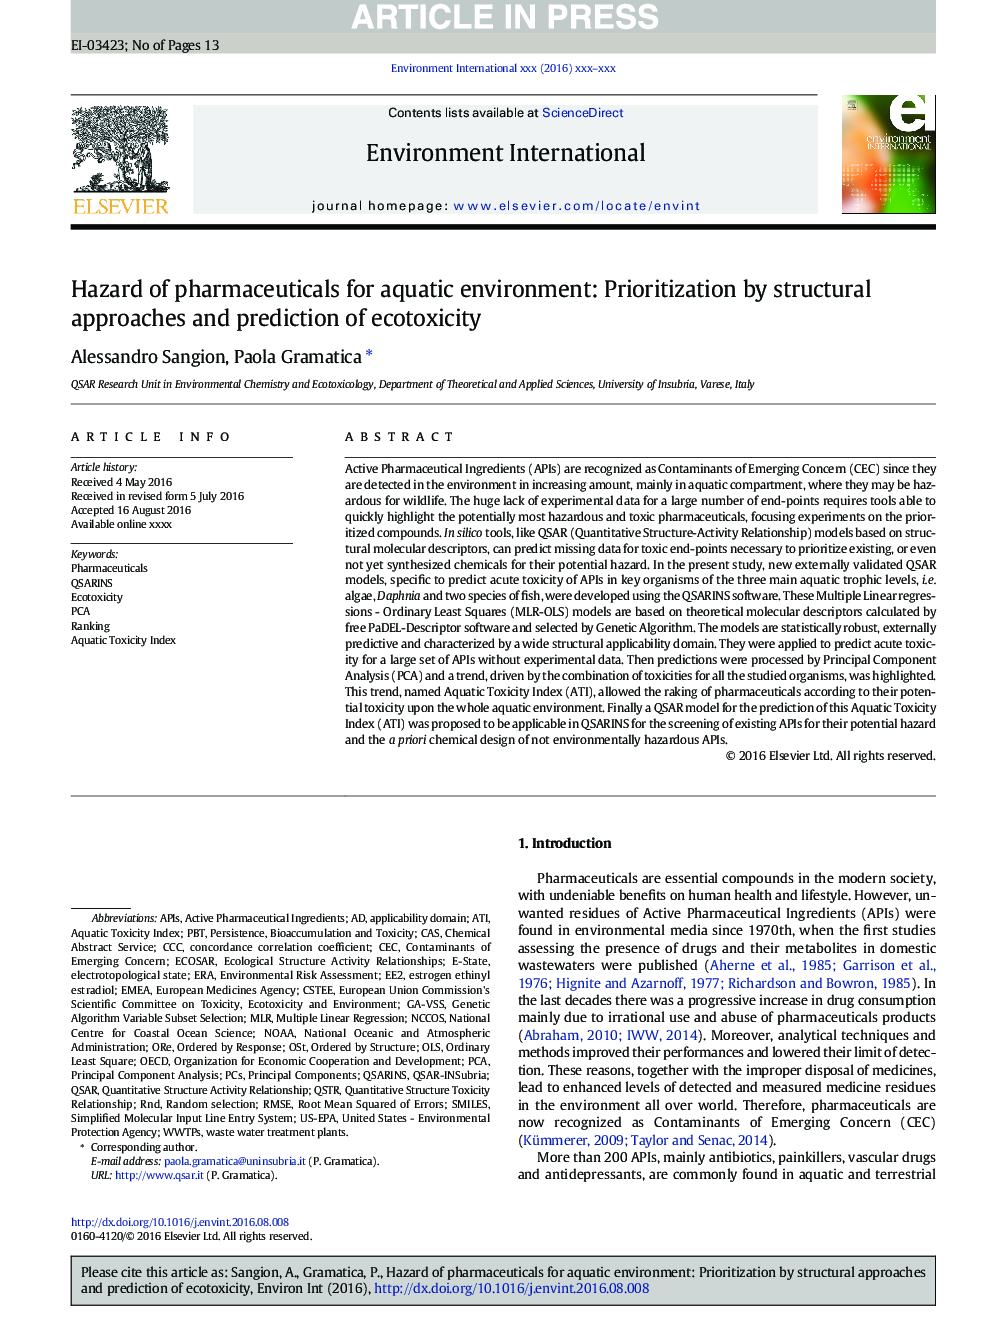 Hazard of pharmaceuticals for aquatic environment: Prioritization by structural approaches and prediction of ecotoxicity